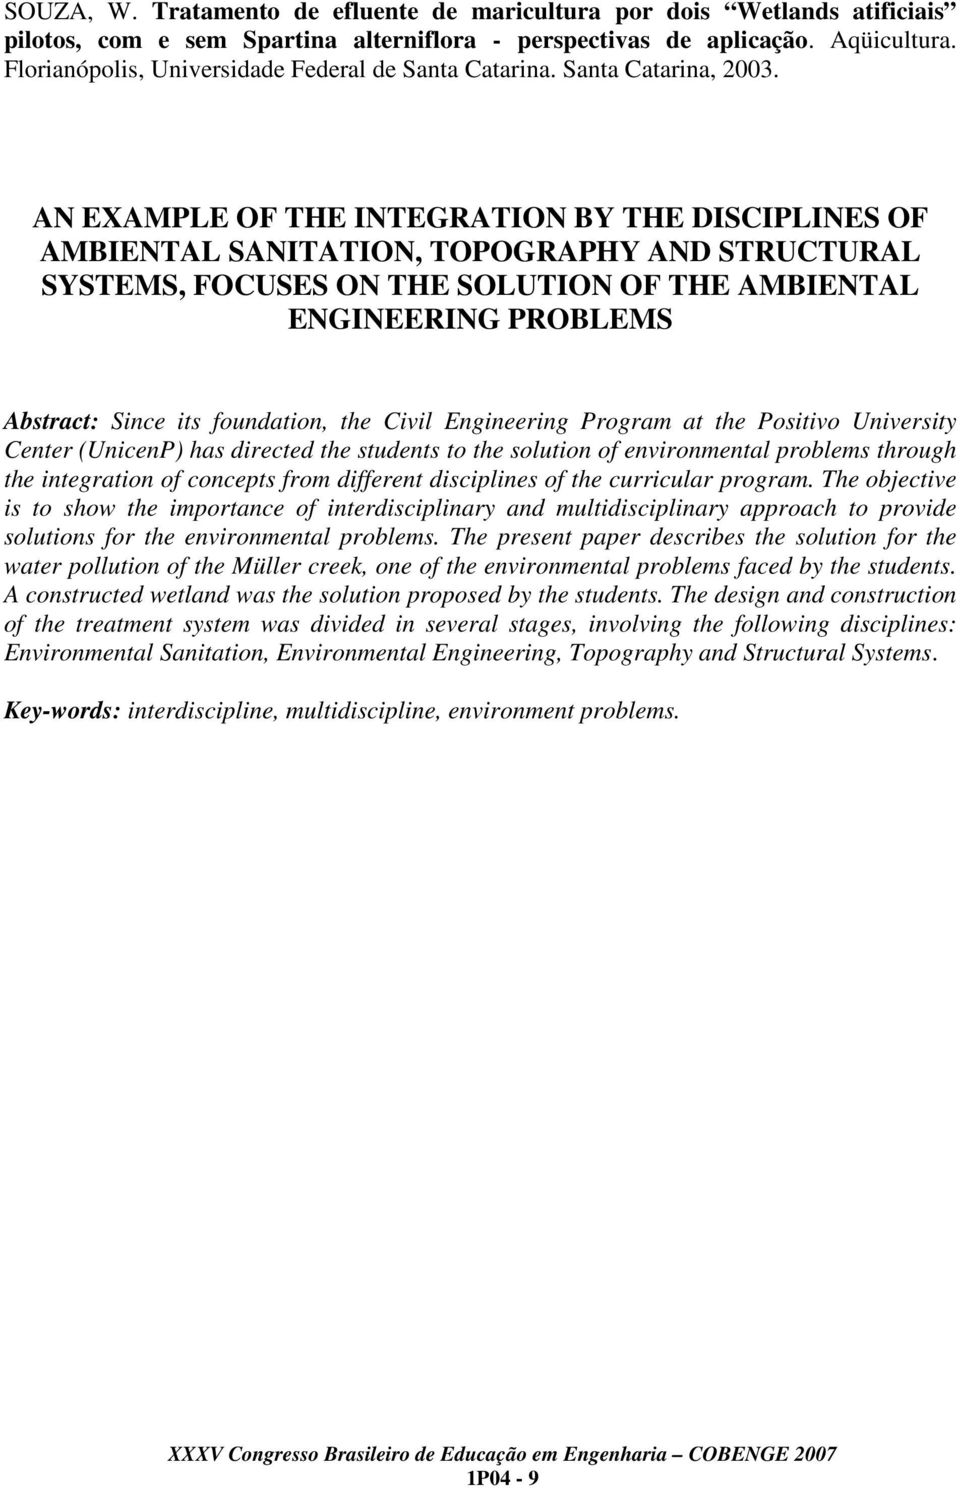 AN EXAMPLE OF THE INTEGRATION BY THE DISCIPLINES OF AMBIENTAL SANITATION, TOPOGRAPHY AND STRUCTURAL SYSTEMS, FOCUSES ON THE SOLUTION OF THE AMBIENTAL ENGINEERING PROBLEMS Abstract: Since its